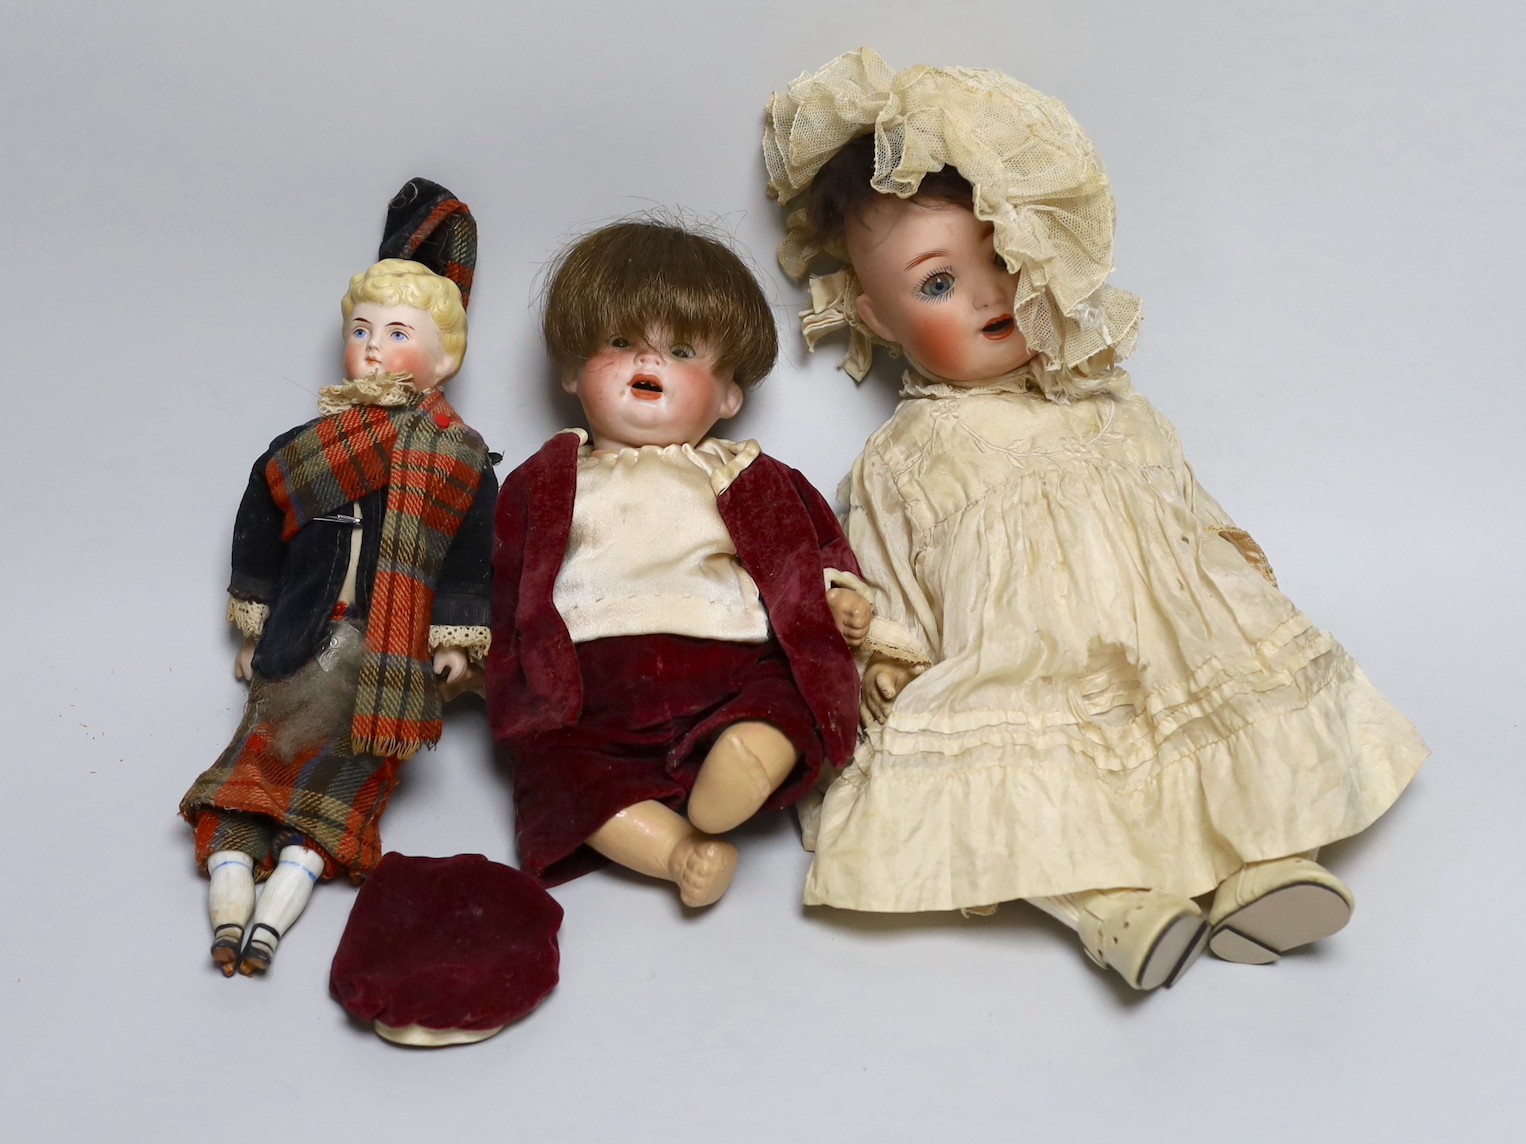 A German bent limb doll, face cracked H12in. German bent limb character baby doll H9in. bisque head Scottish doll with bisque shoes and hands H10in.